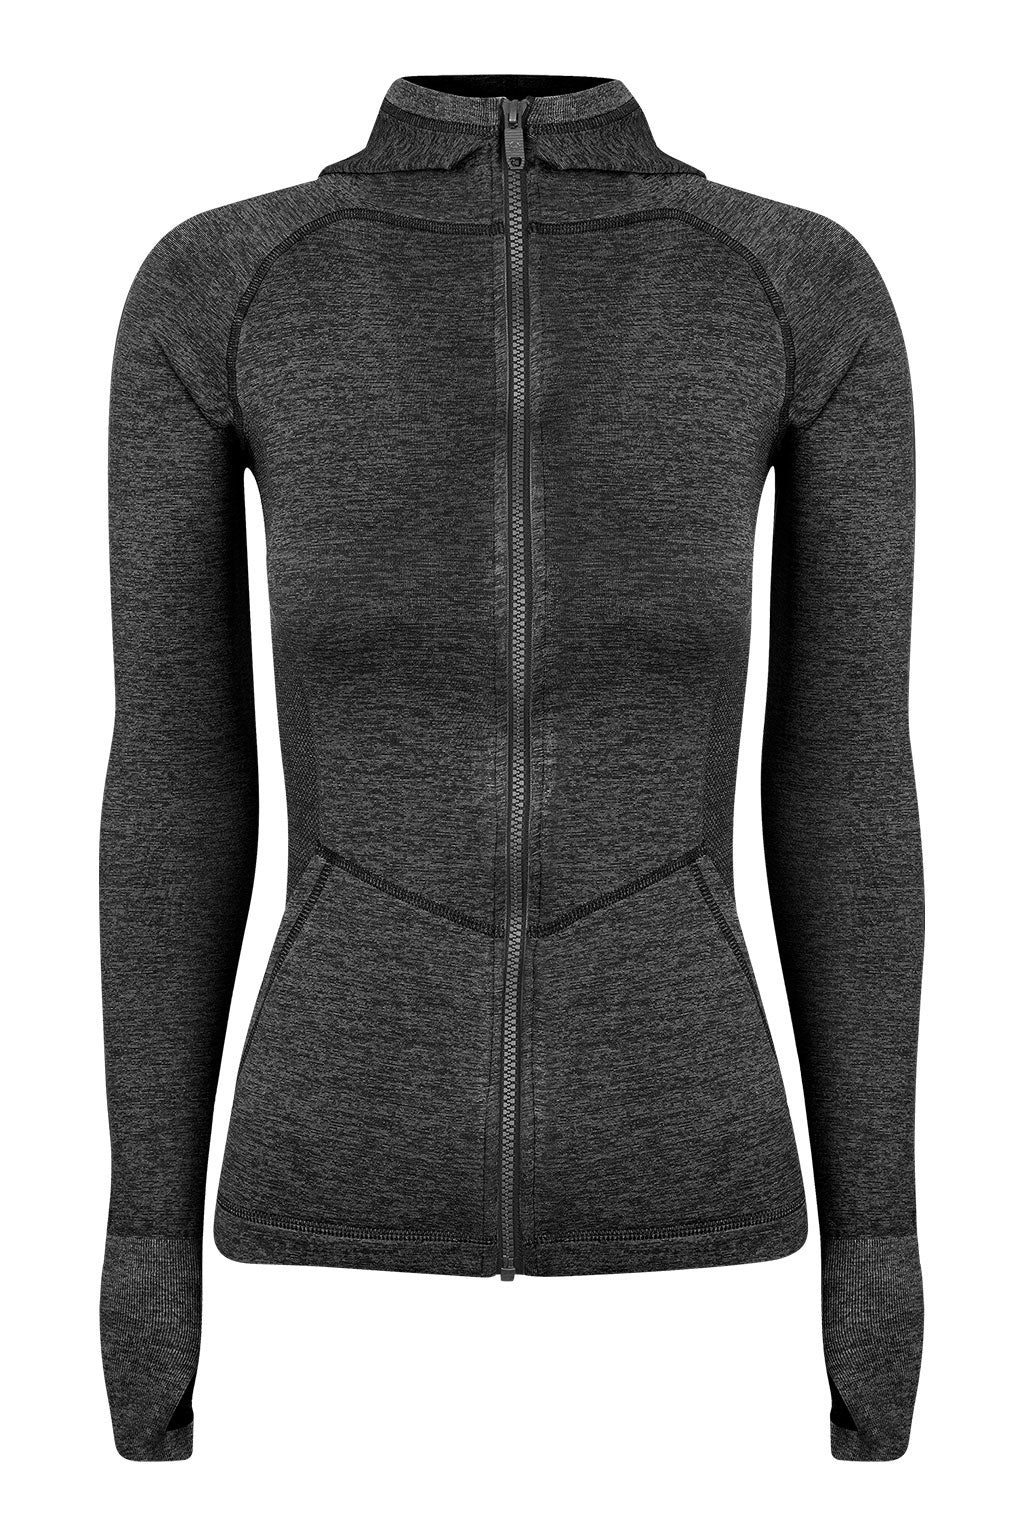 FITNESS Hooded Sport Jacket with zipper closure